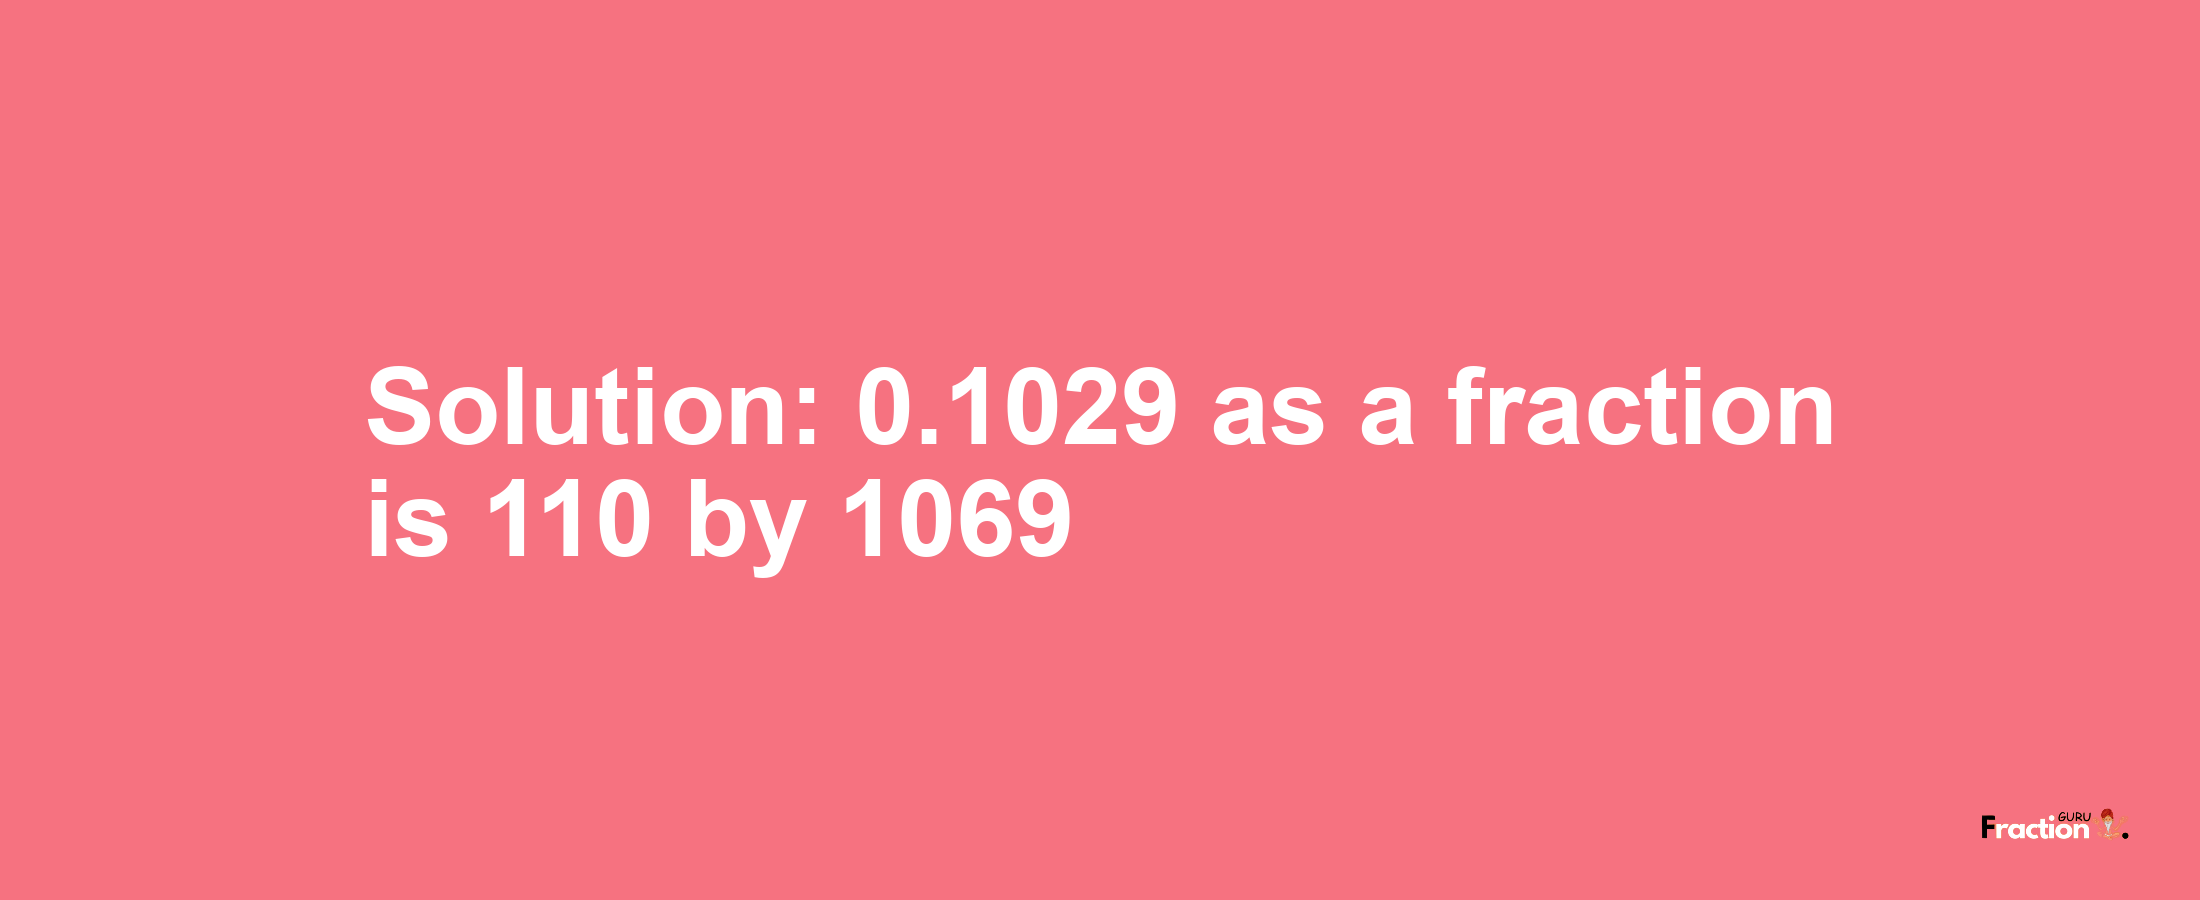 Solution:0.1029 as a fraction is 110/1069